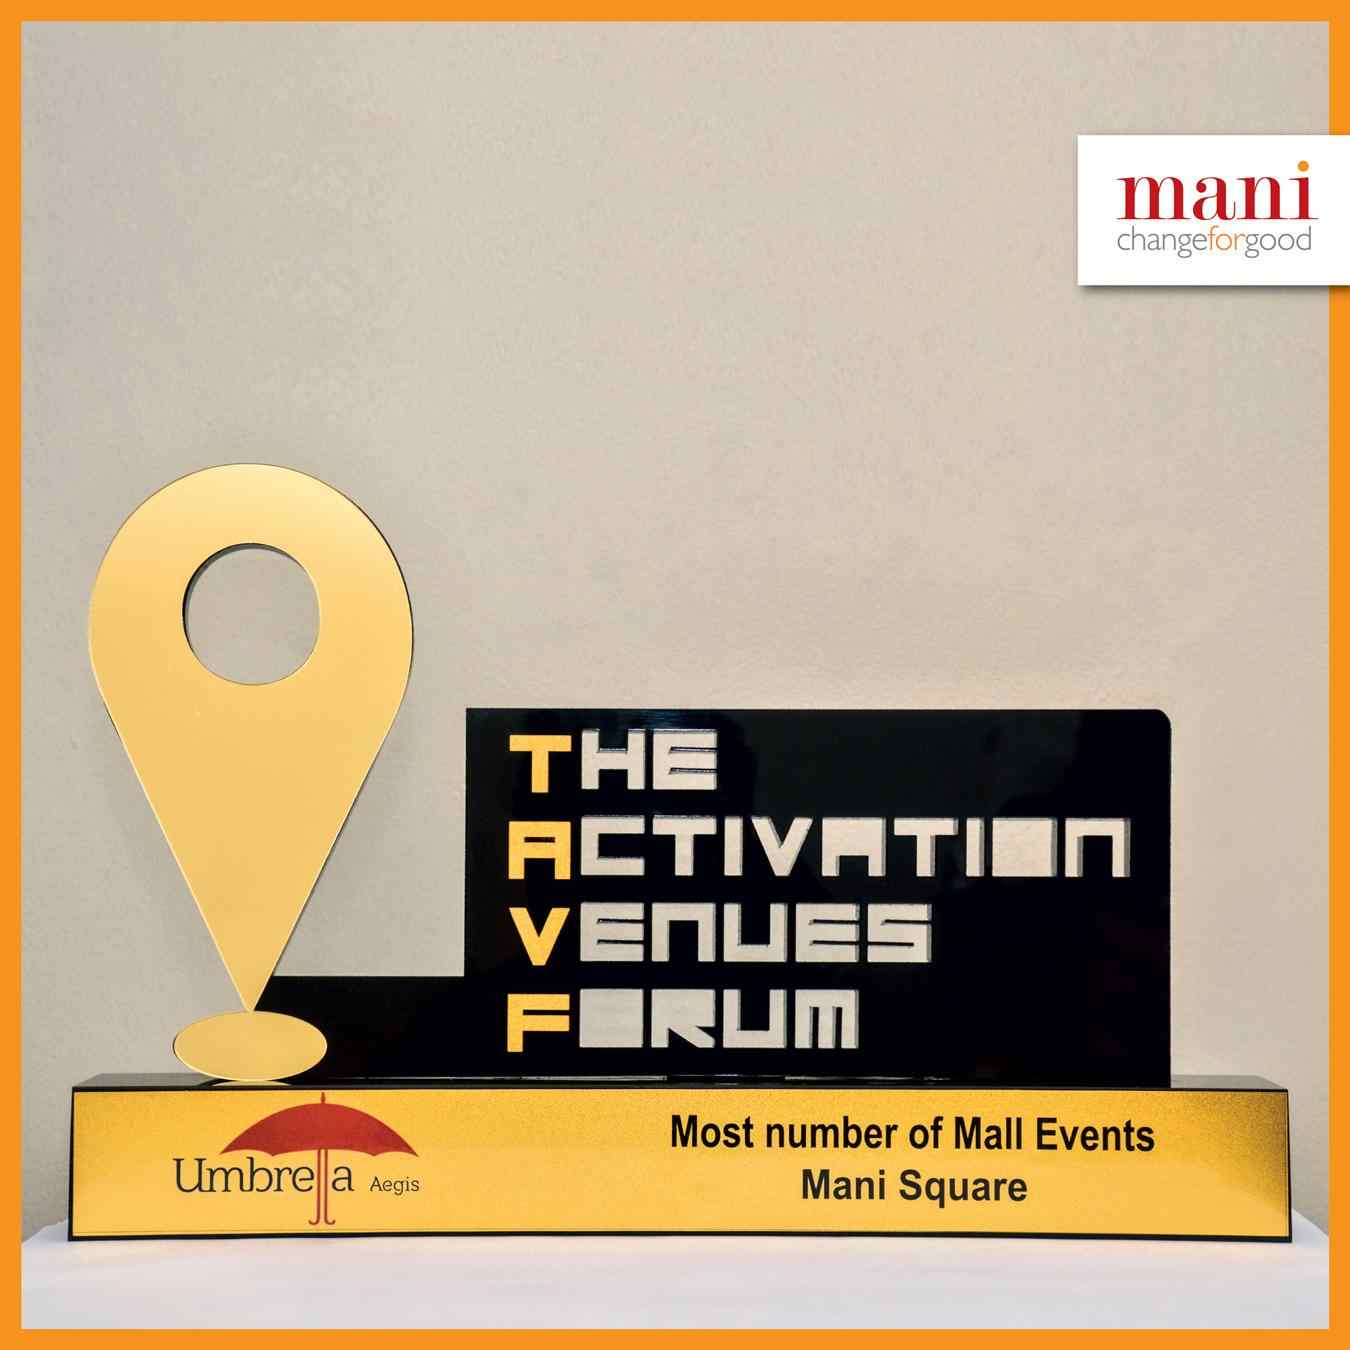 Mani Square in Kolkata awarded for “Most numbers of Mall Events” in TAVF AWARD 2017 Update